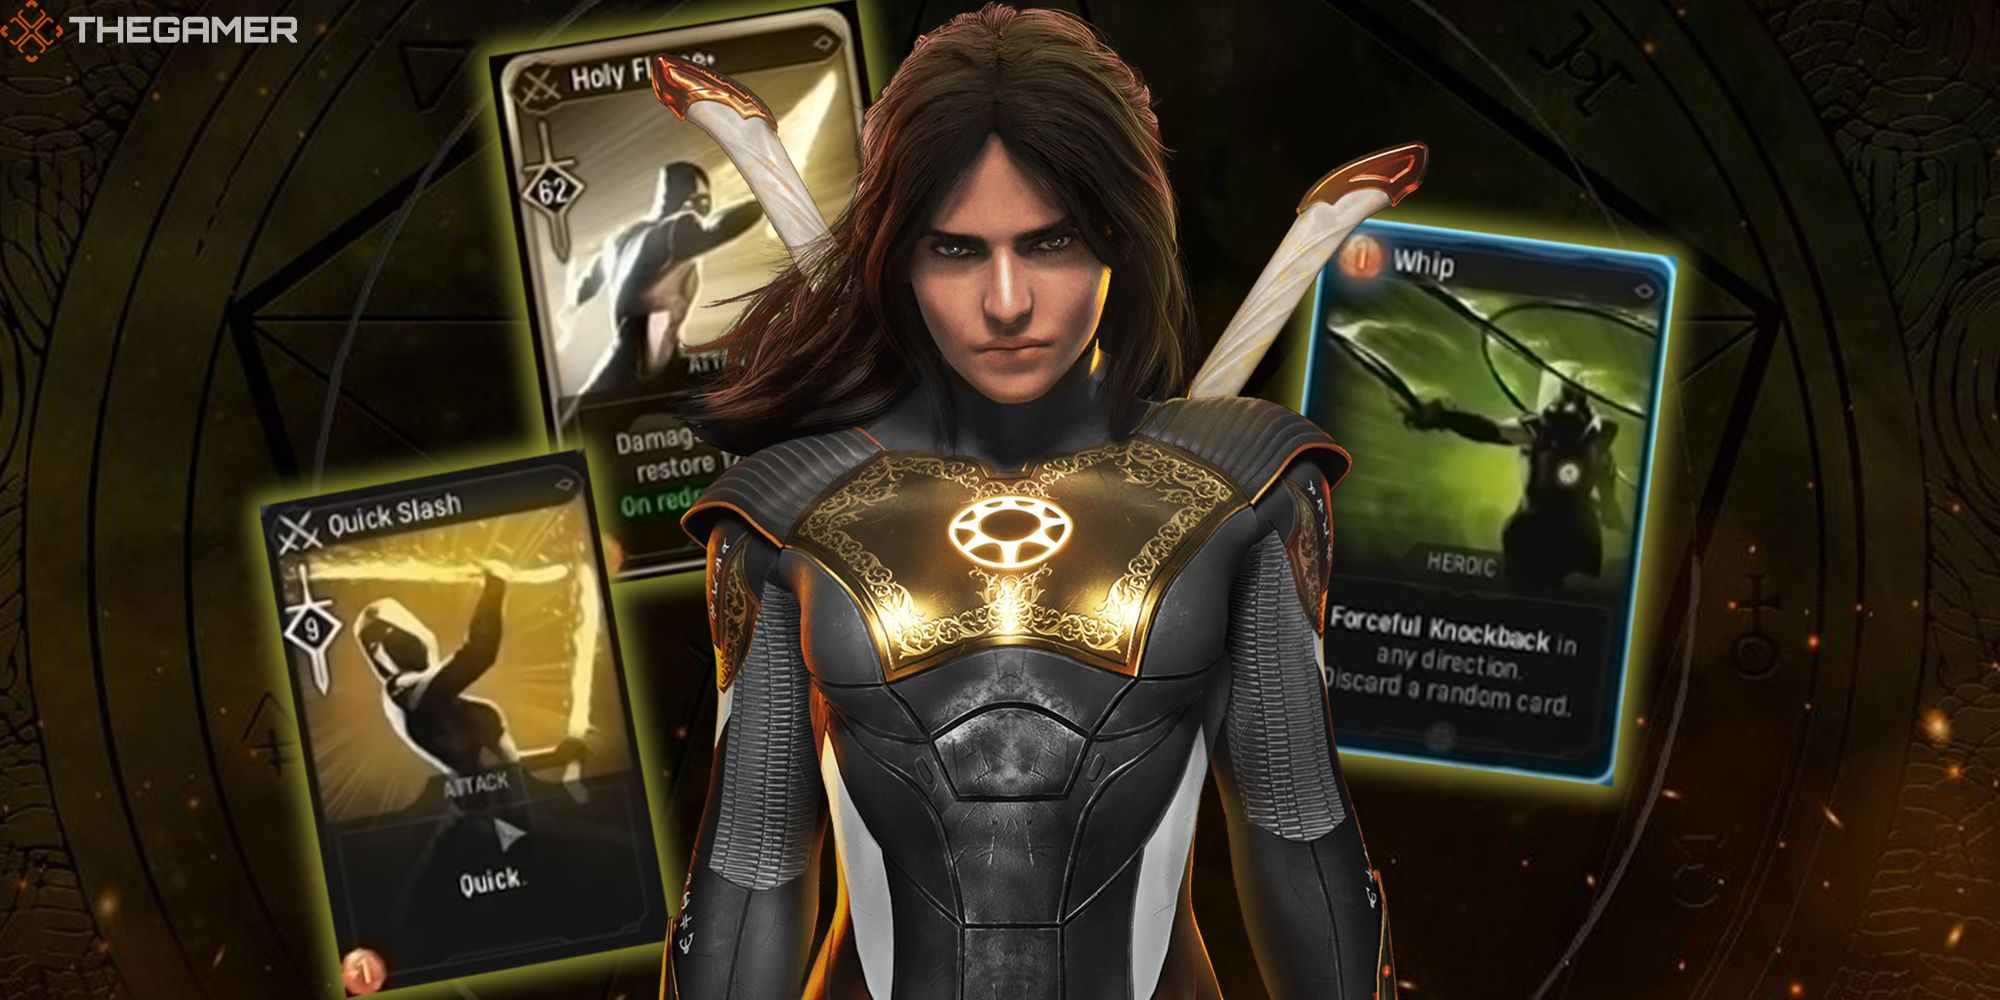 The Hunter stands in front of several cards from their deck against a mythical witchy background. Marvel's Midnight Suns.